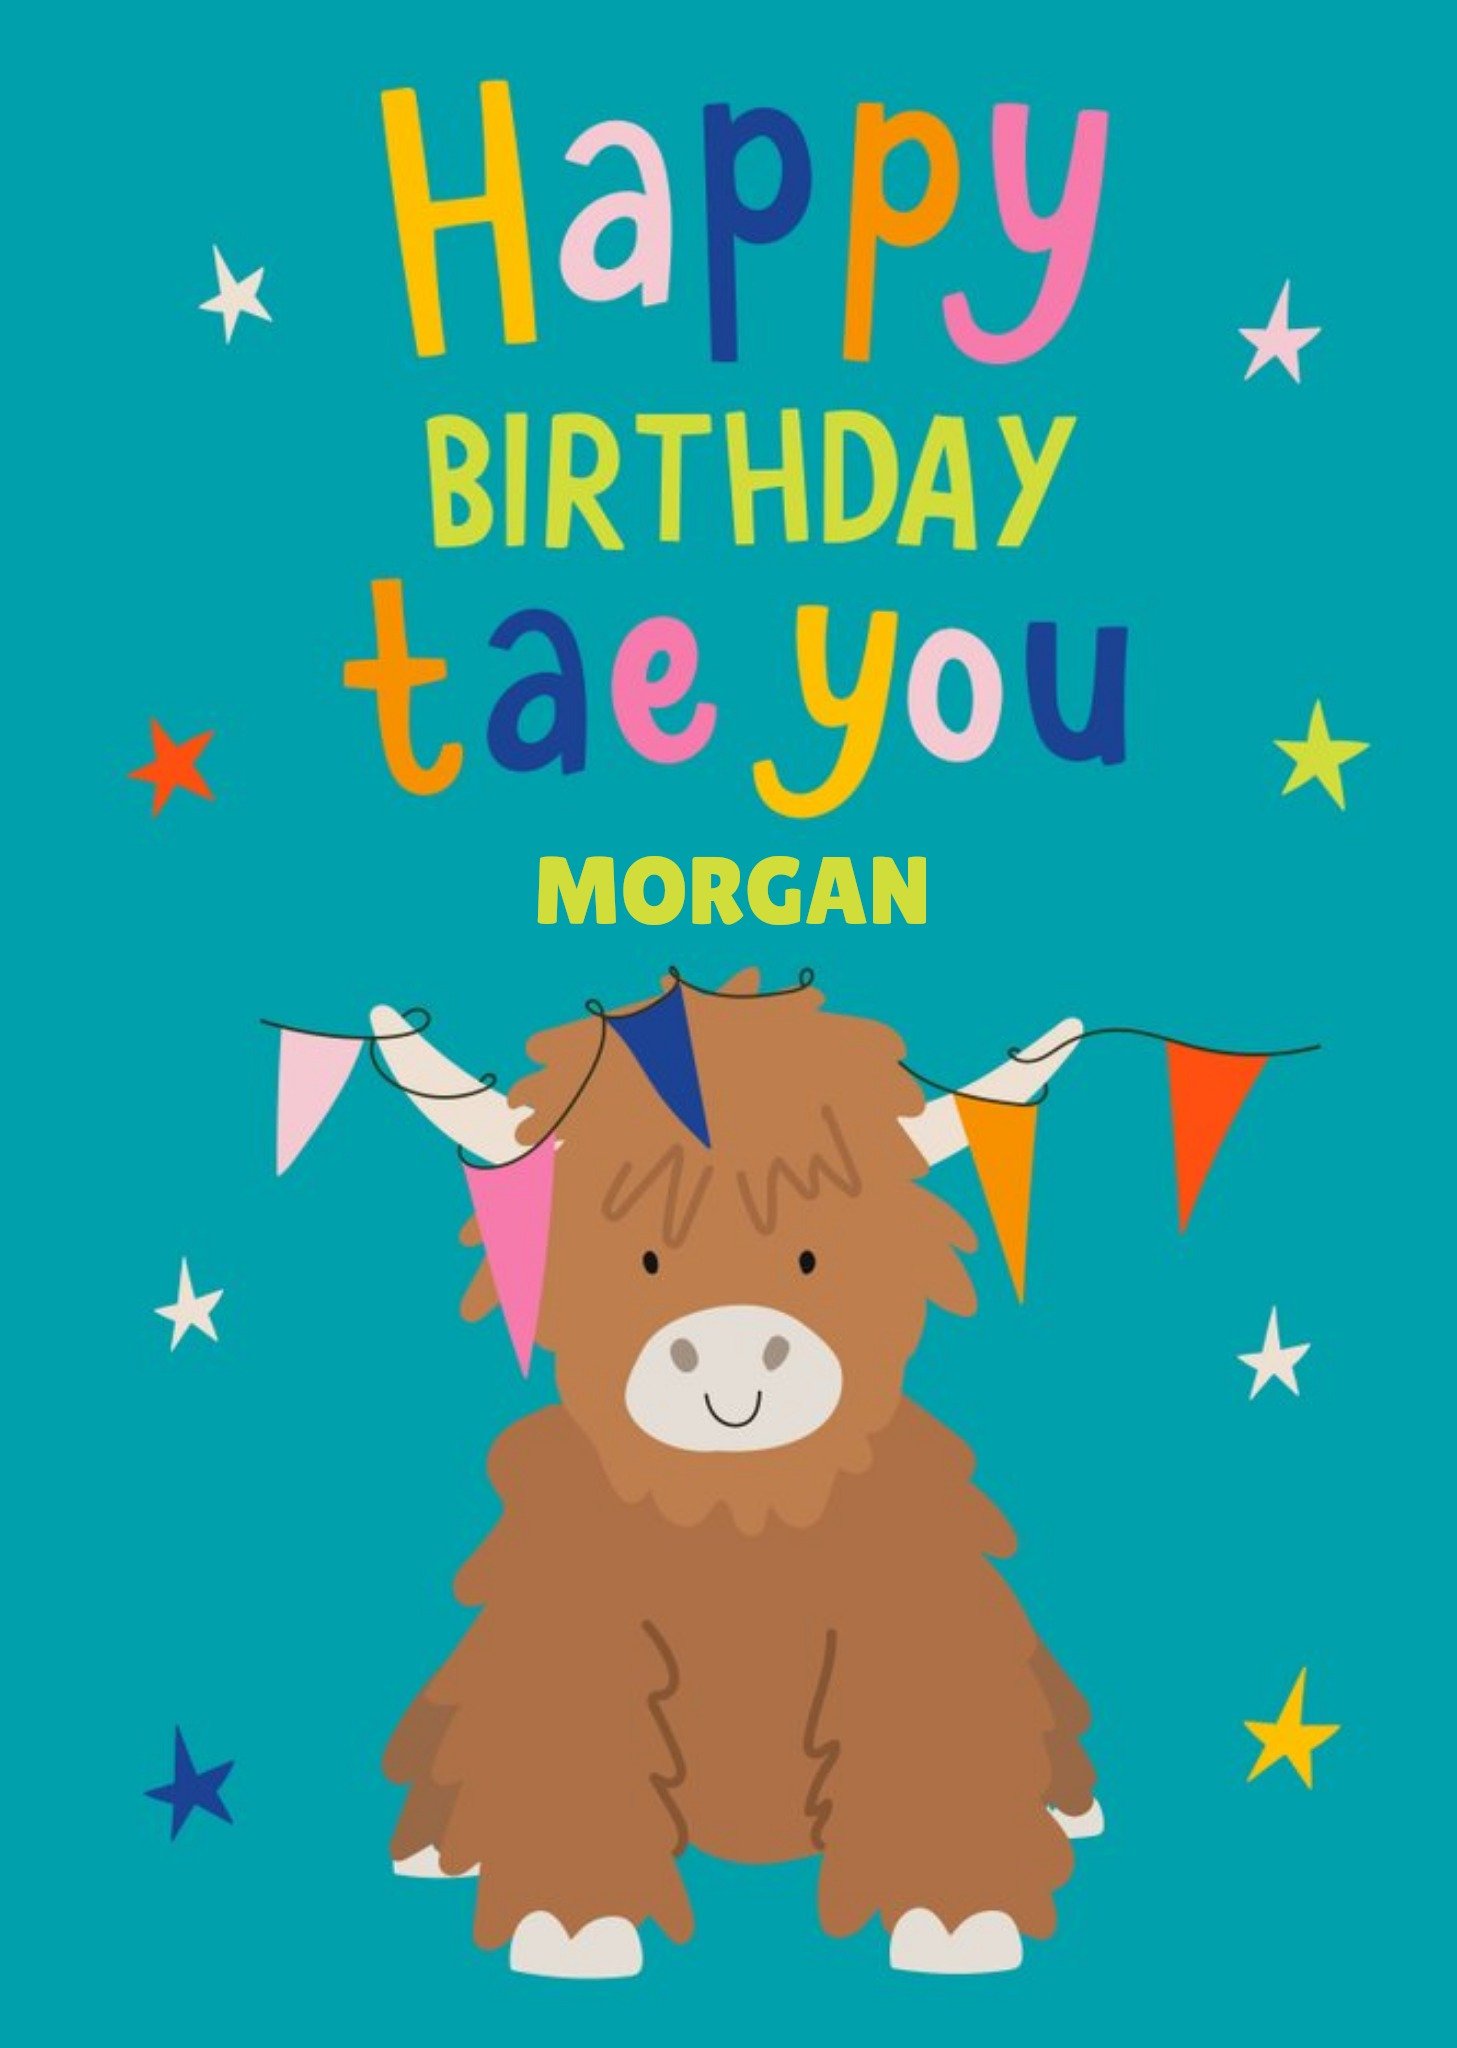 Moonpig Illustration Of A Highland Cow. Happy Birthday Tae You Card, Large